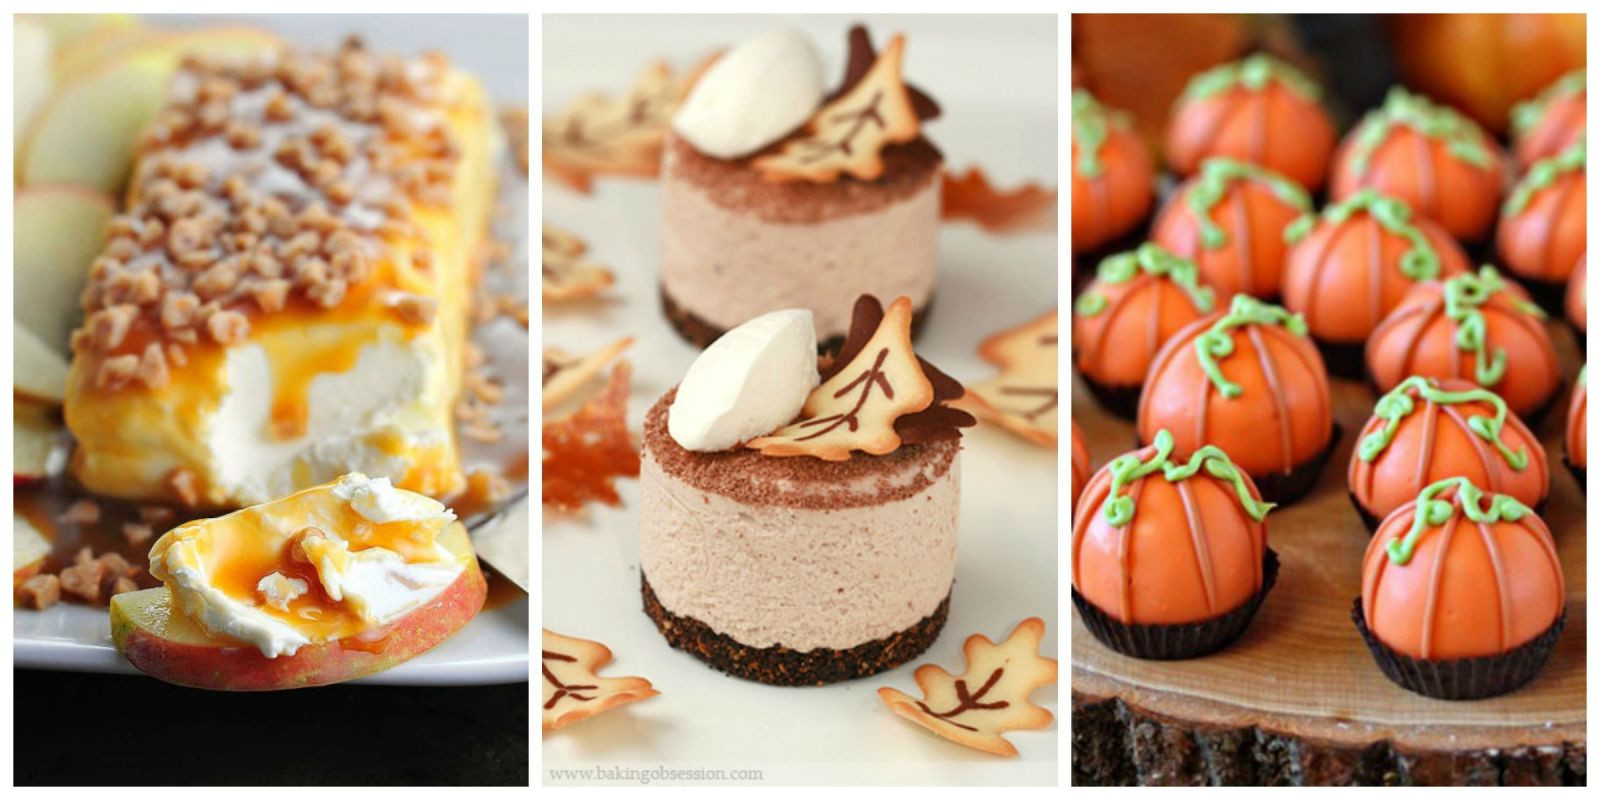 Fall Desserts For A Crowd
 35 Easy Fall Dessert Recipes Best Treats for Autumn Parties